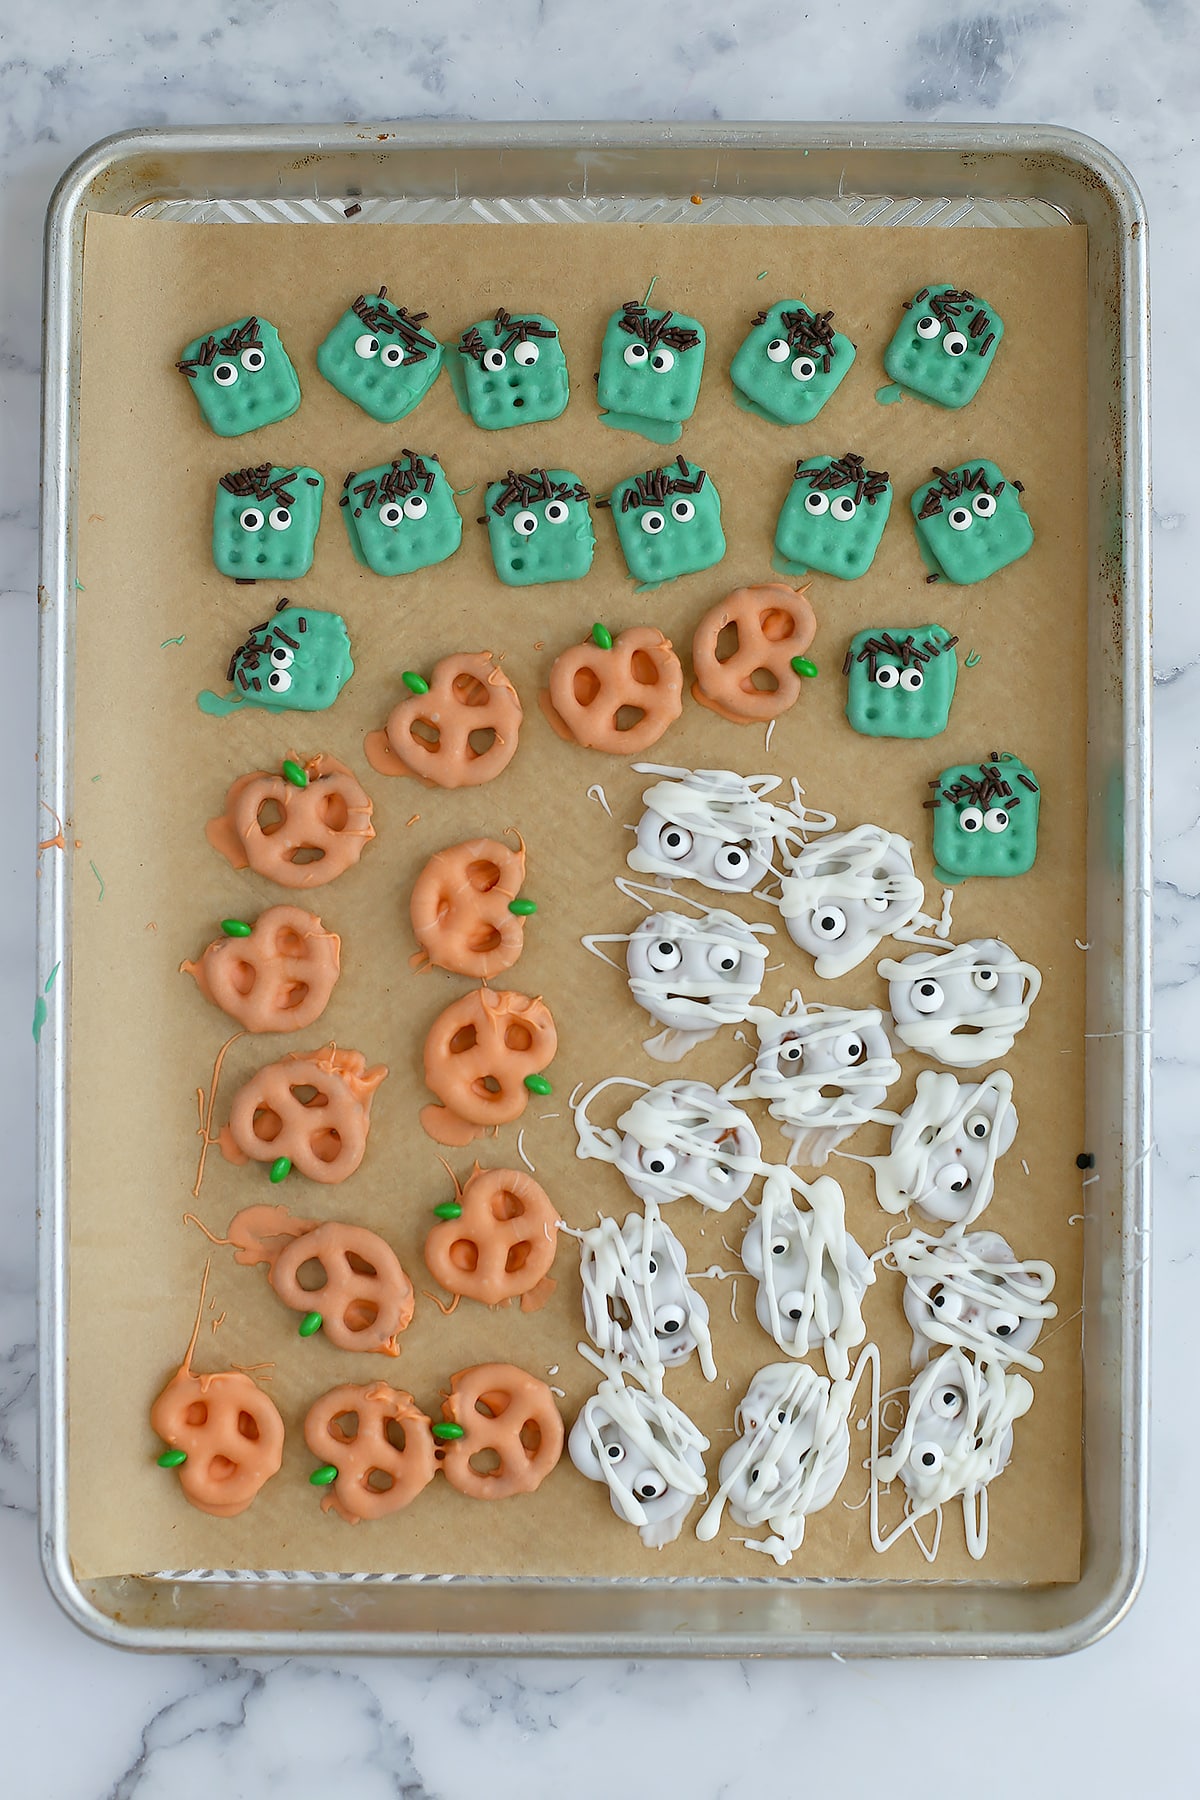 A baking sheet lined with brown parchment paper and topped with chocolate dipped halloween pretzels.